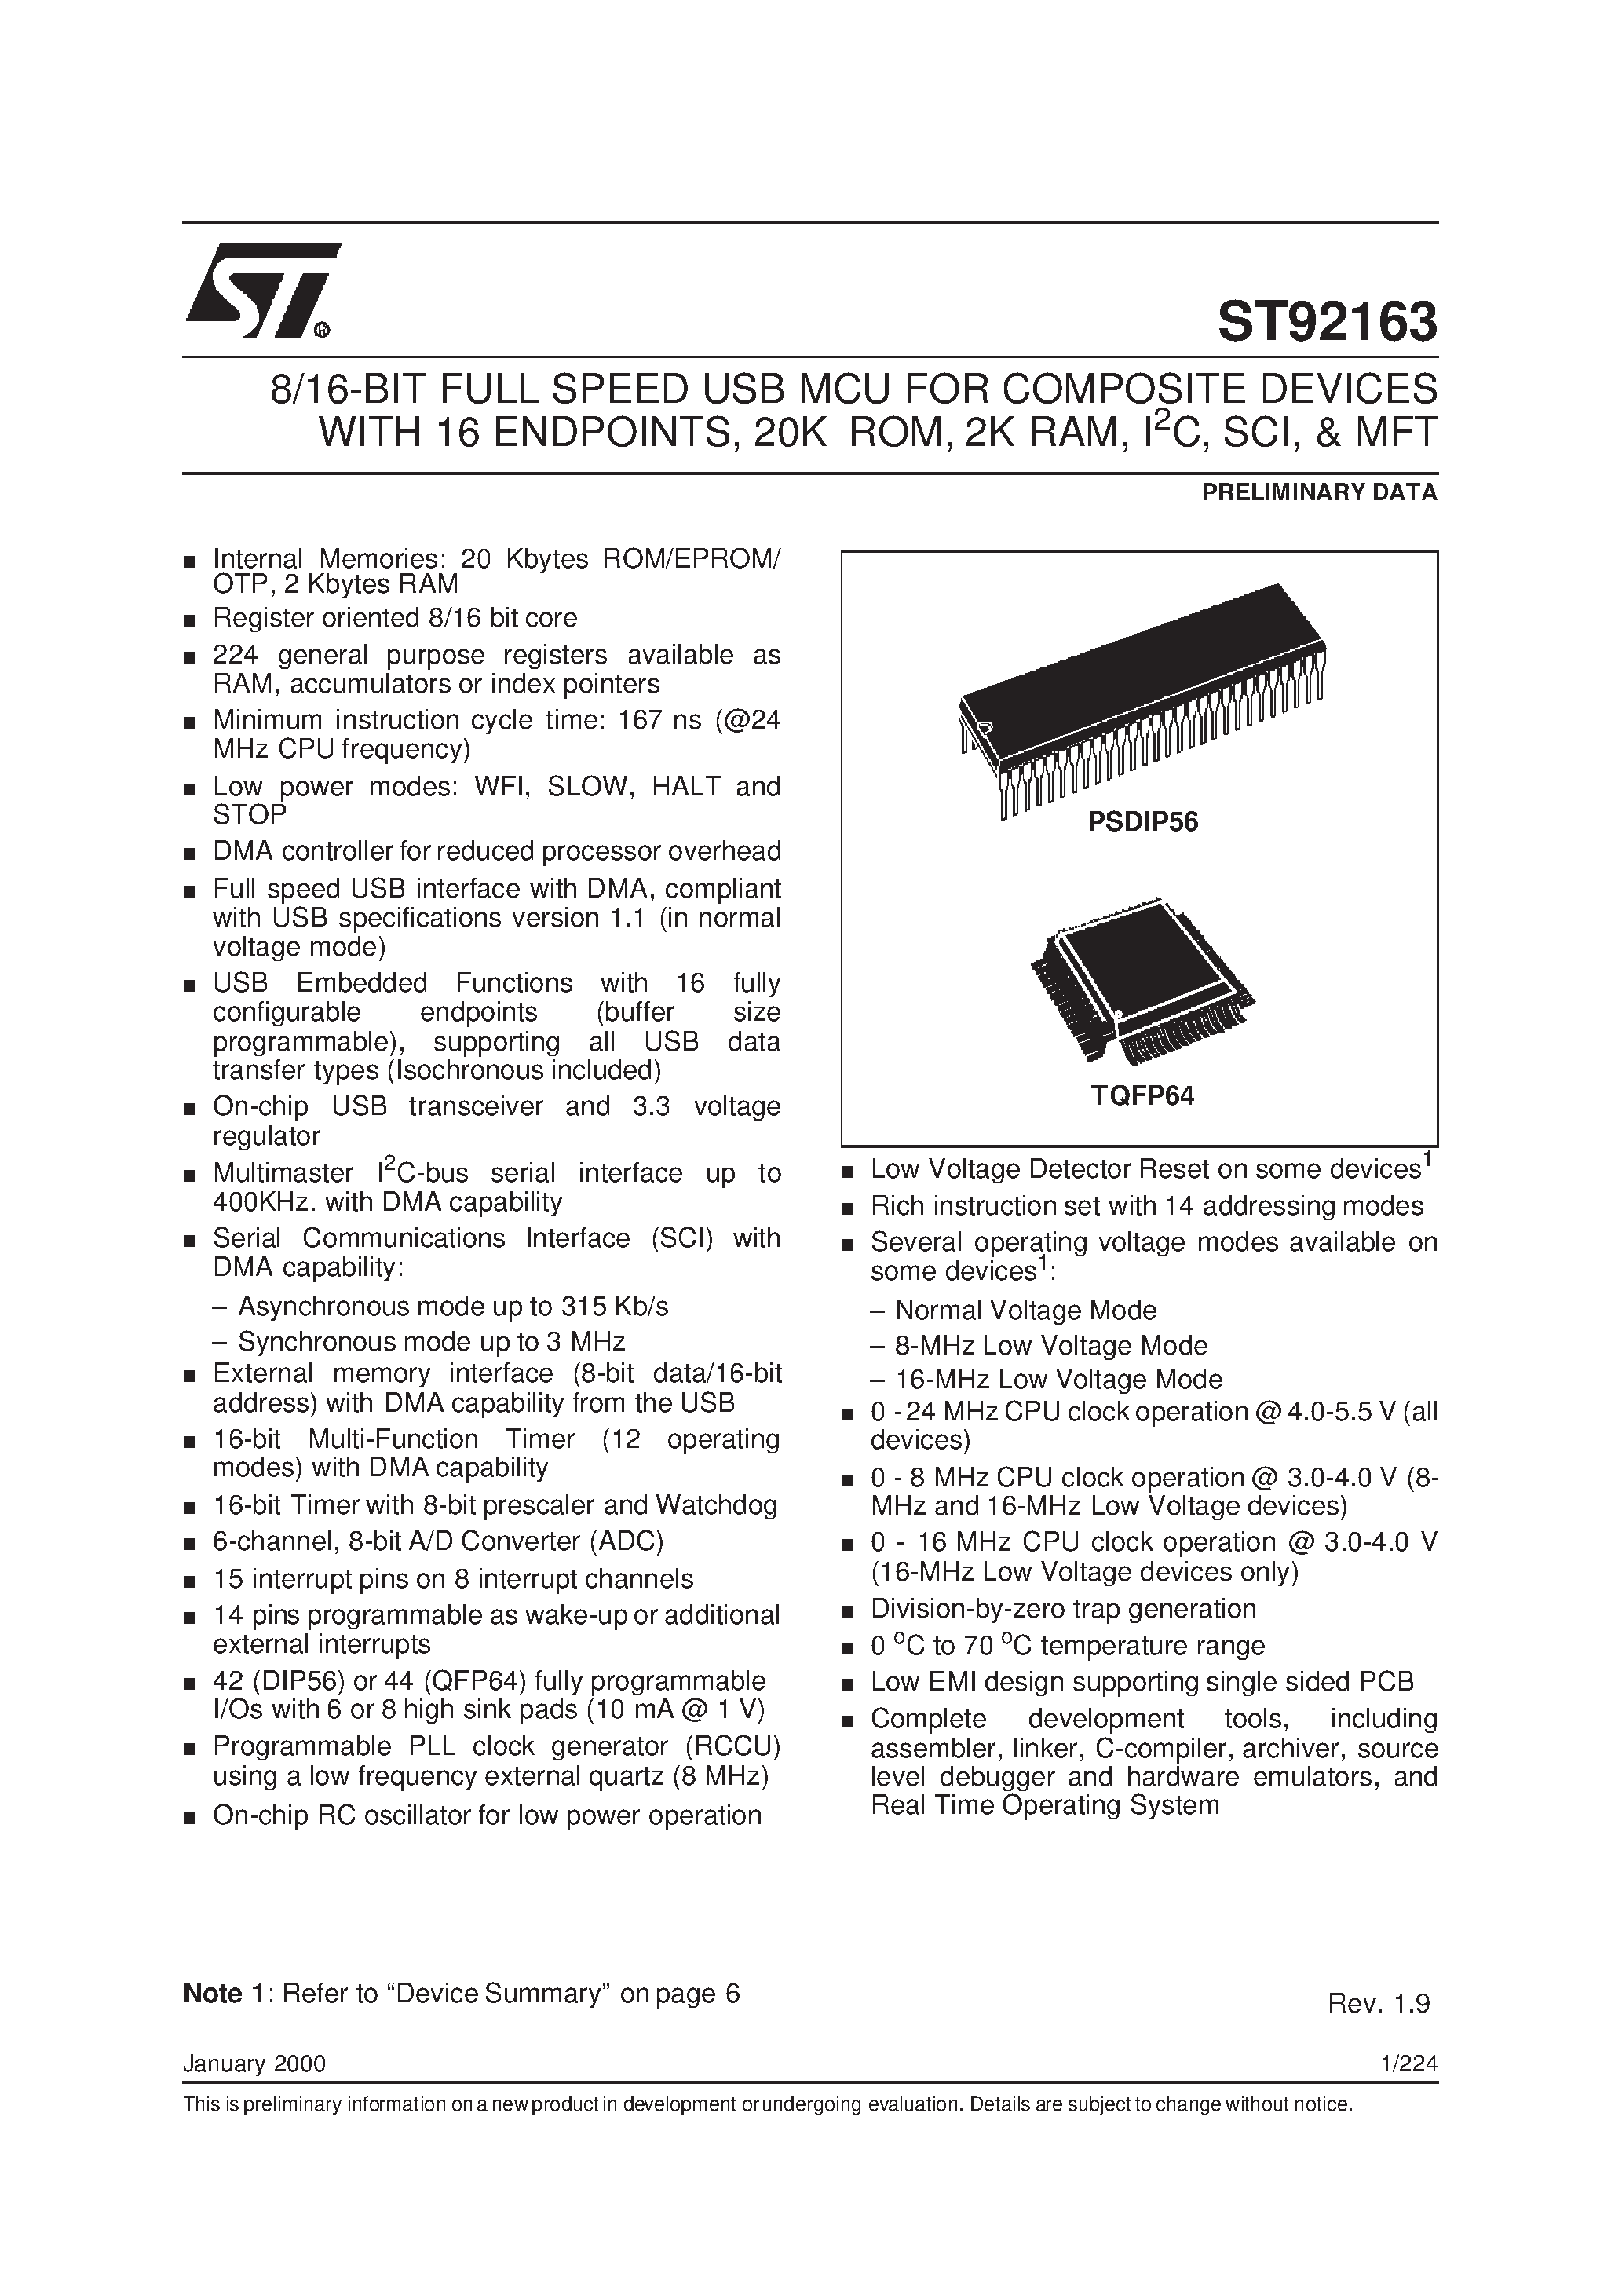 Datasheet ST92163 - 8/16-BIT FULL SPEED USB MCU FOR COMPOSITE DEVICES page 1